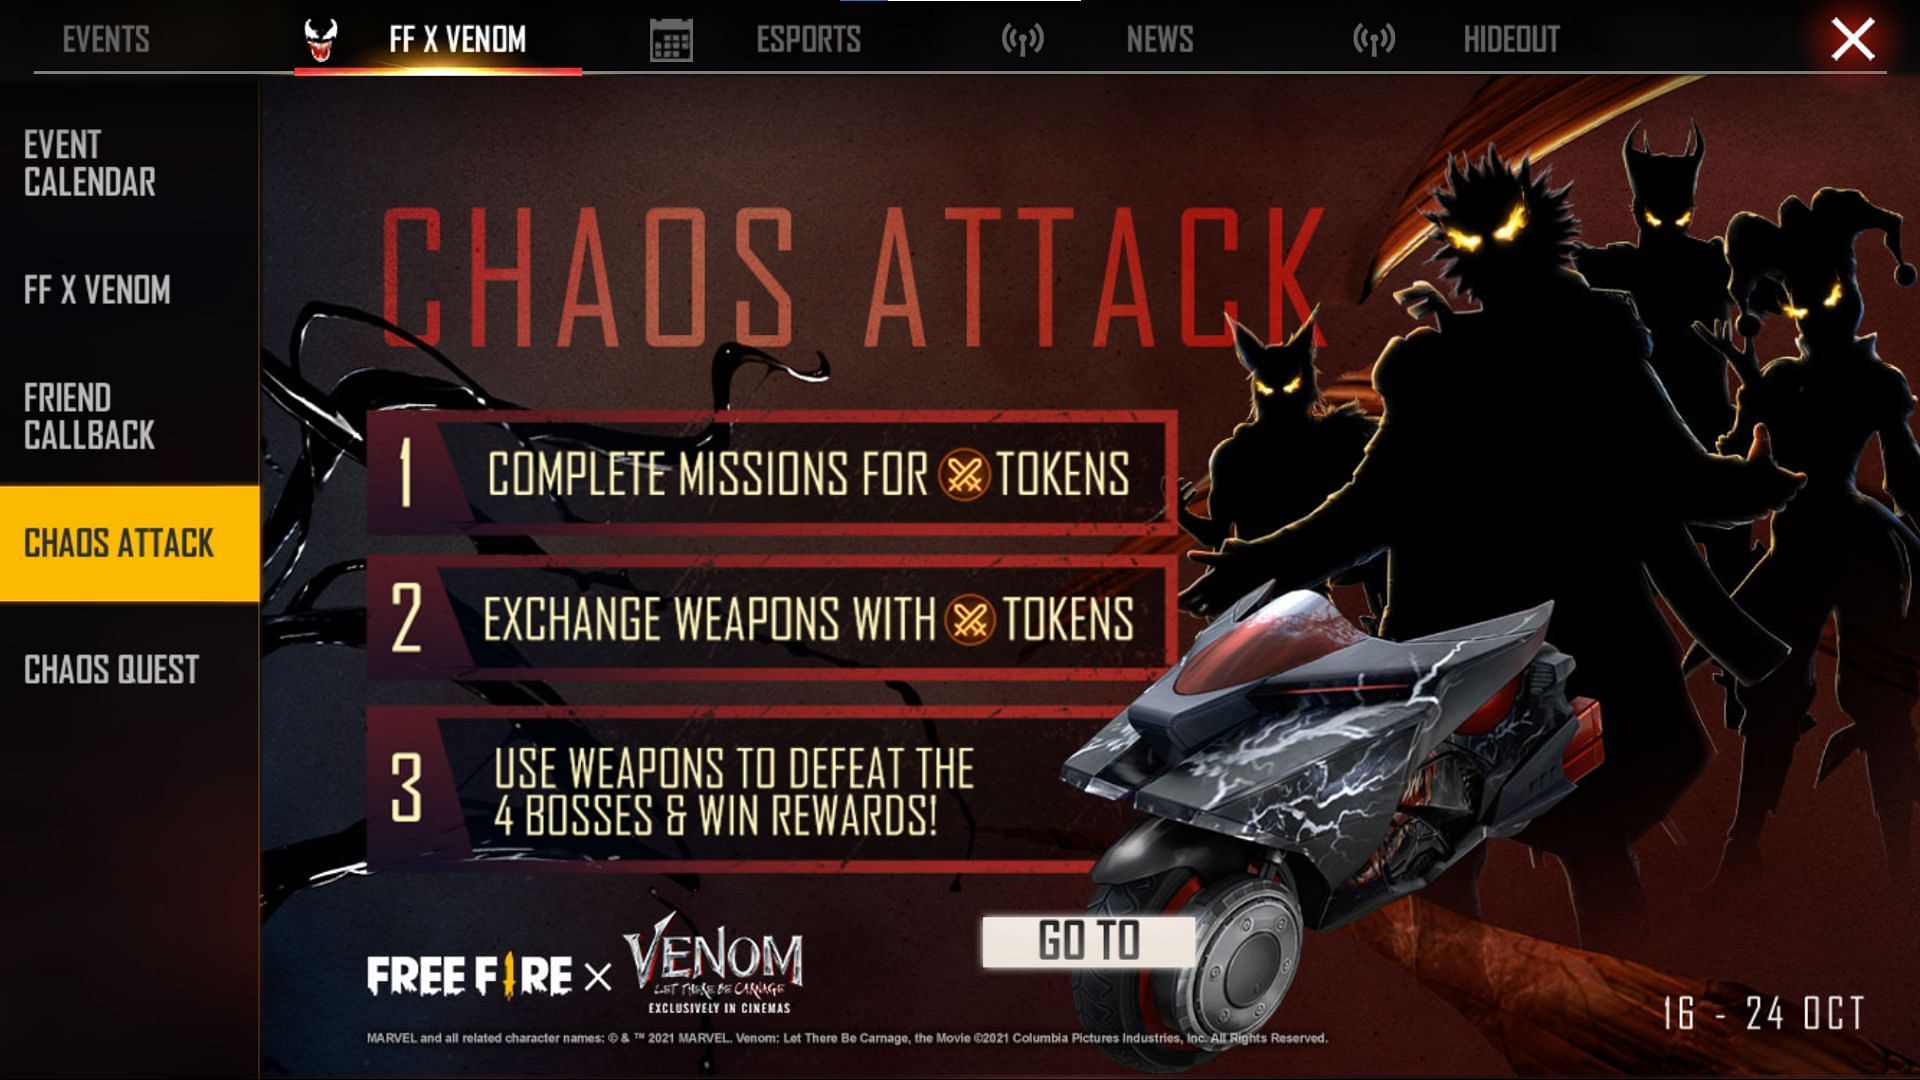 The Chaos Attack event (Image via Free Fire)